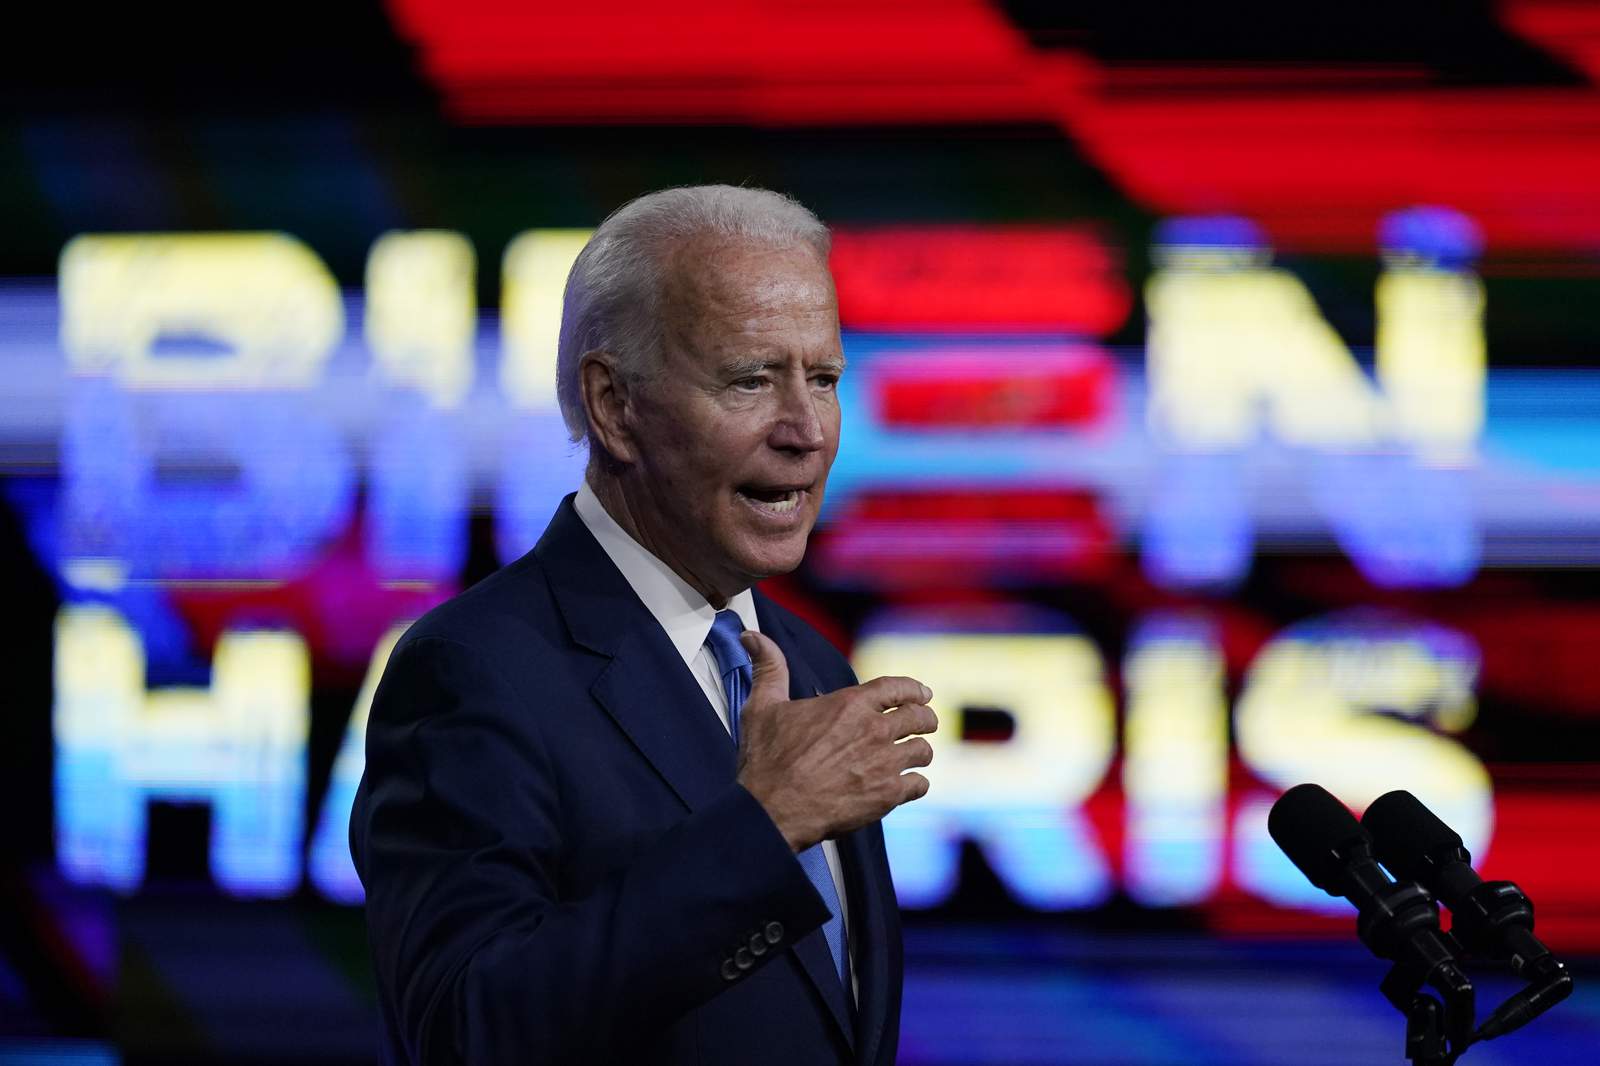 Biden campaign to microtarget Michigan women in new ads